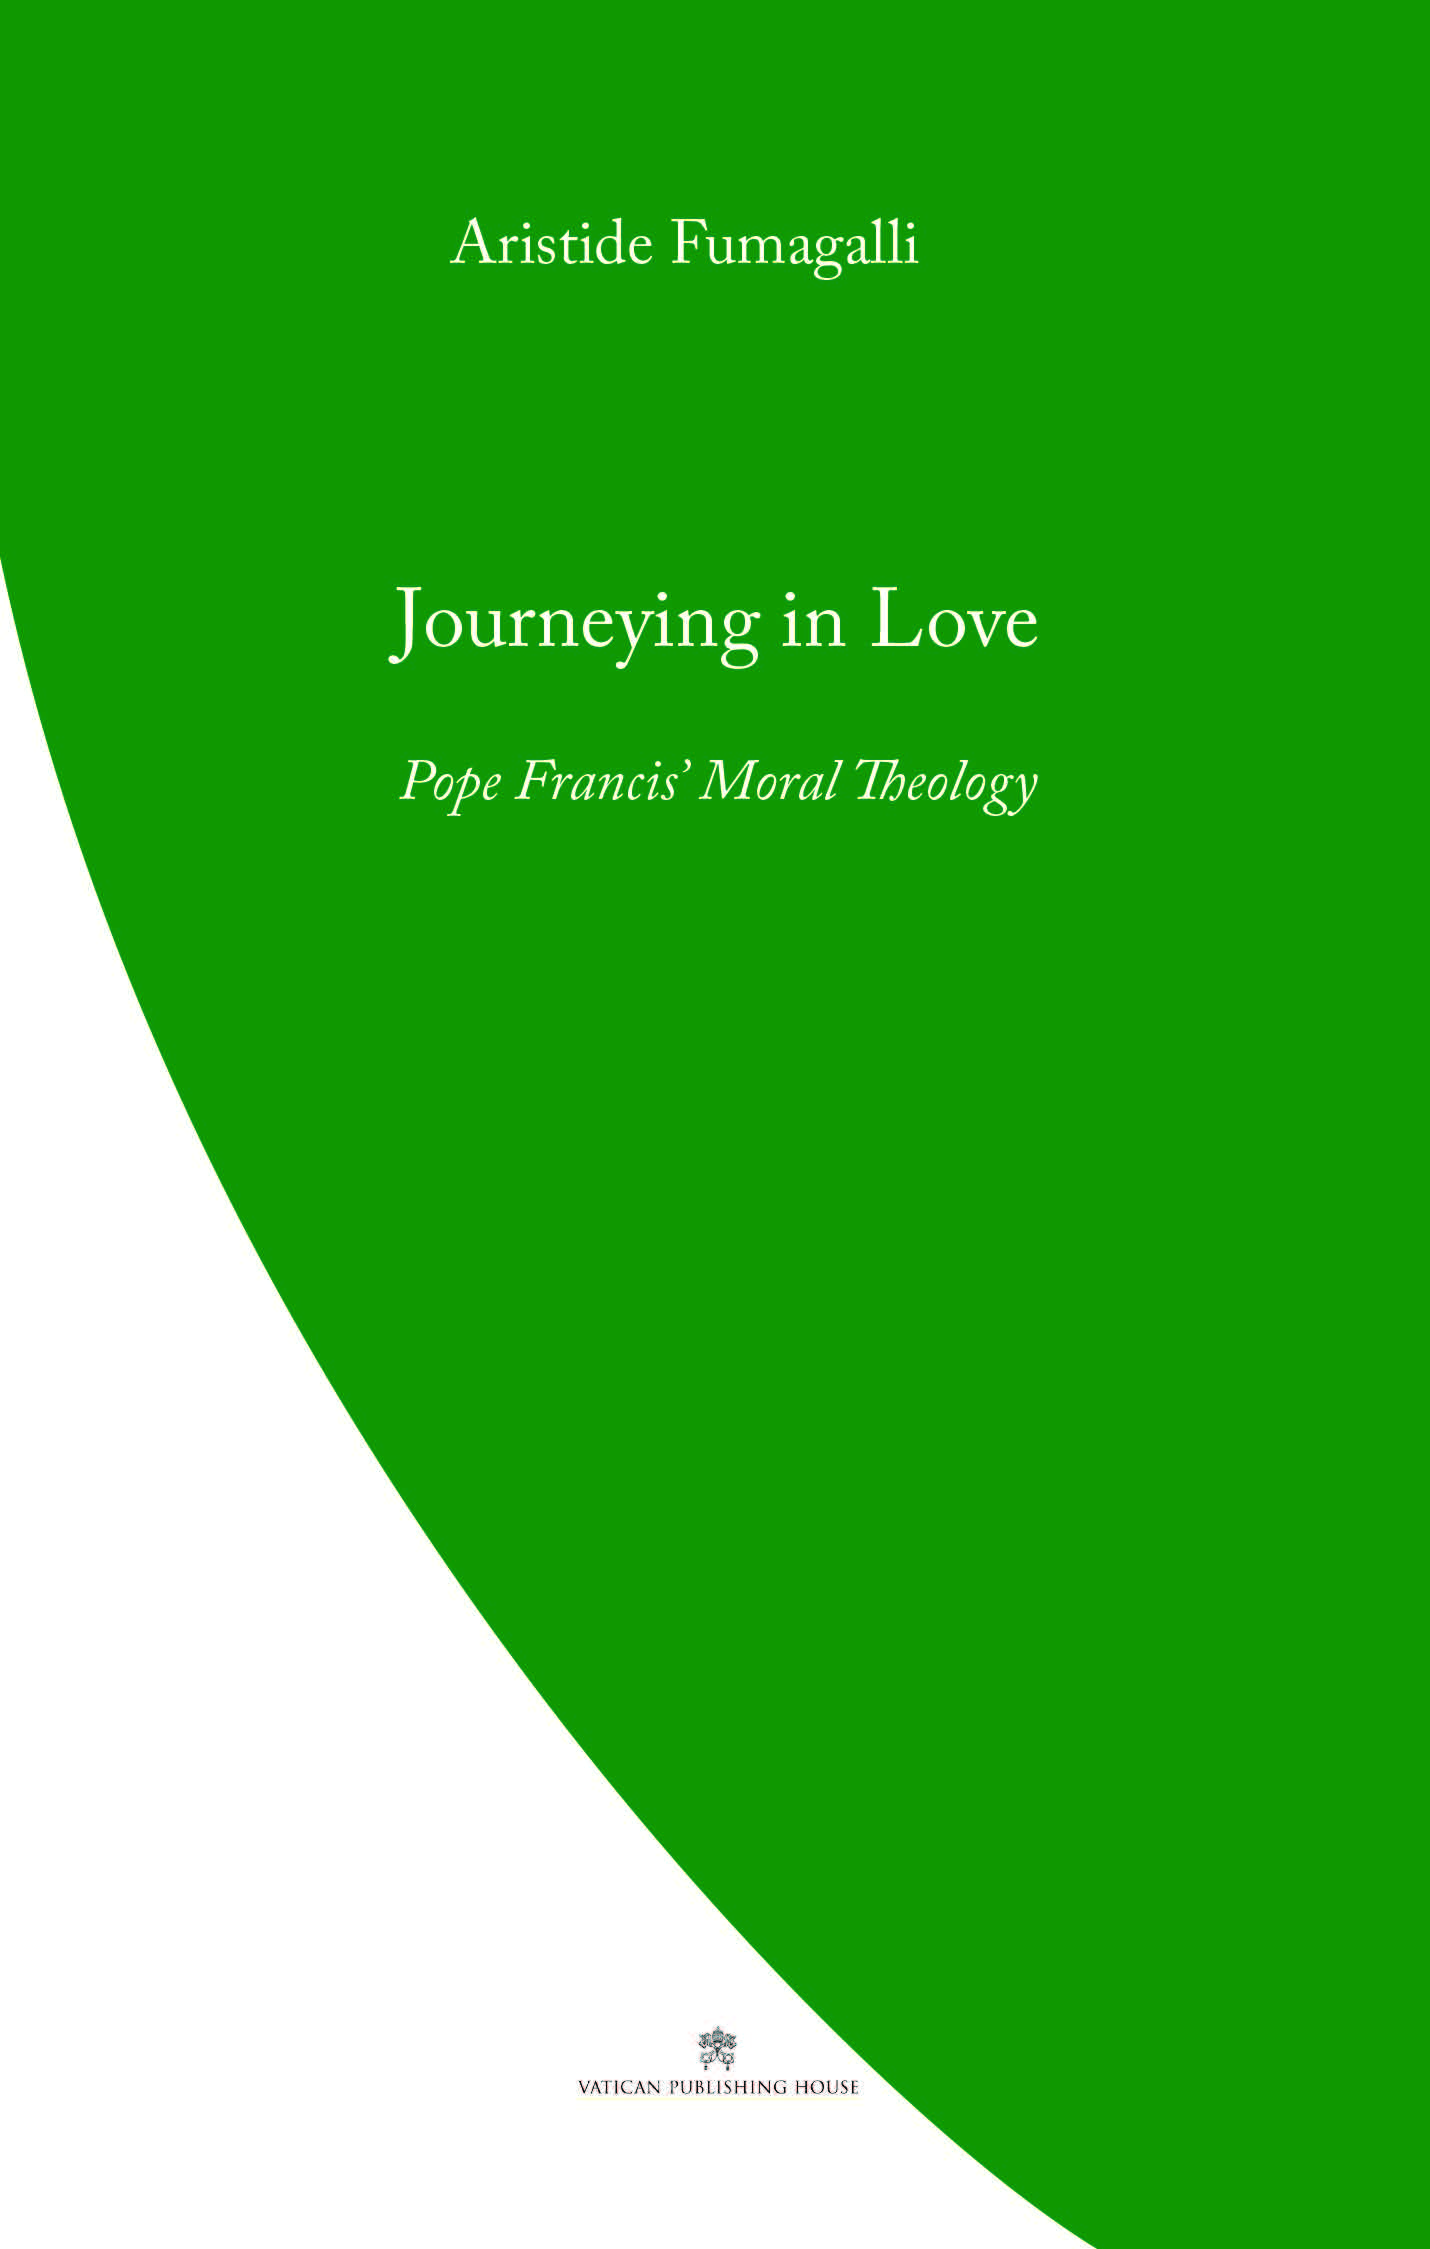 Journeying in Love  Pope Francis' Moral Theology / Aristide Fumagalli